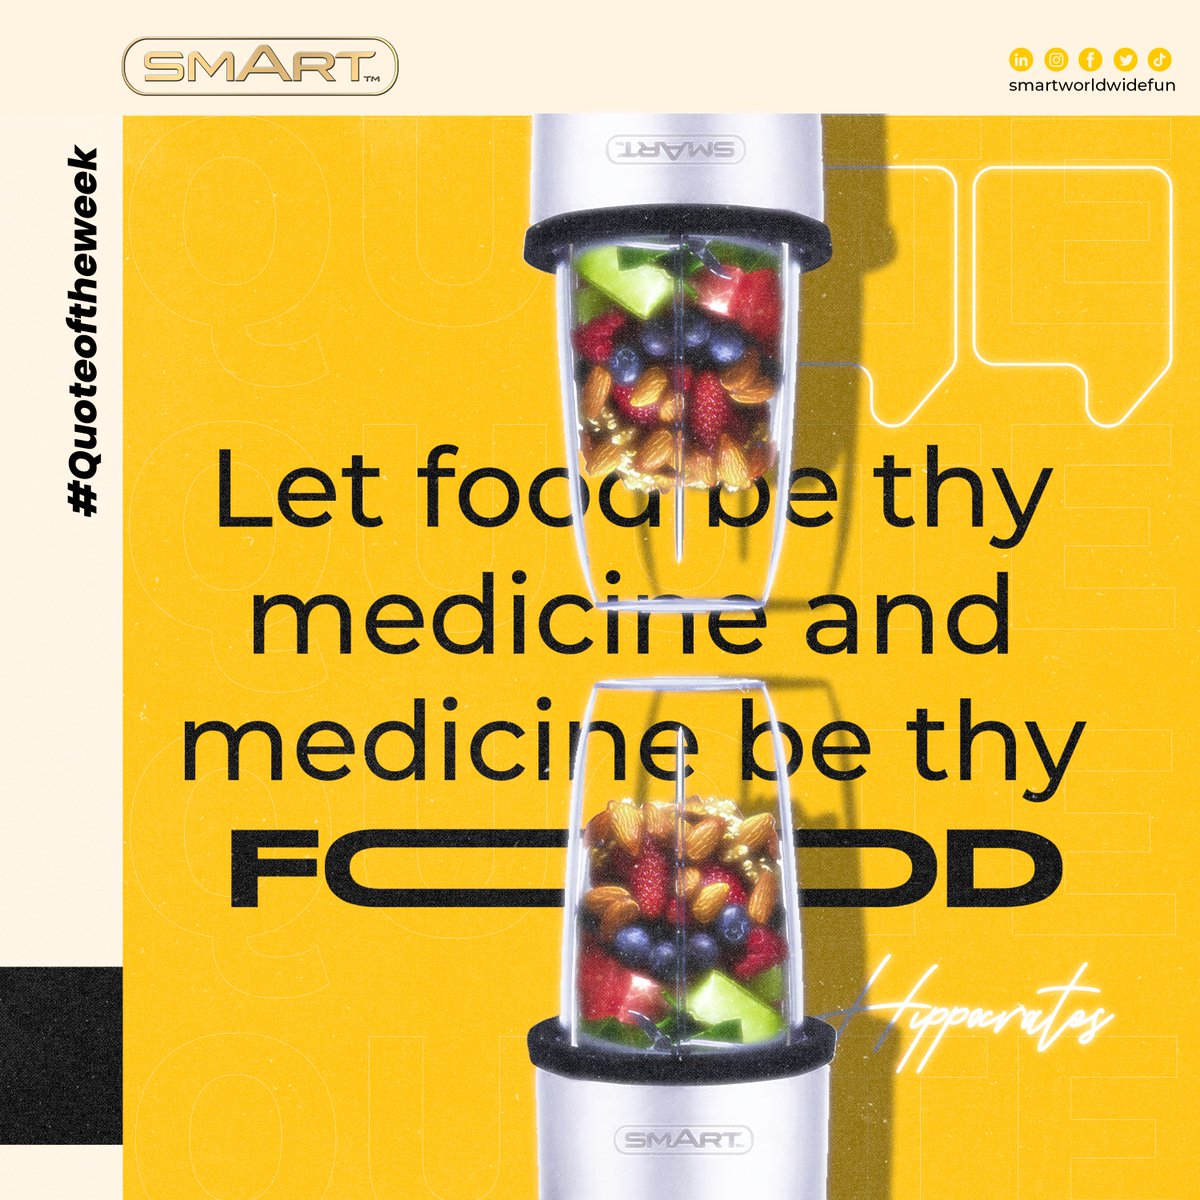 Embracing the wisdom of Hippocrates: 'Let food be thy medicine and medicine be thy food.' 🌿 With the help of SMART Master Bullet

#healthyfoodeating #healthyfoodlove #healthyfoodpost #healthyfoodforkids #healthyfoodvideos #healthyfoodinspo #healthyfoodies #healthyfoodchoice